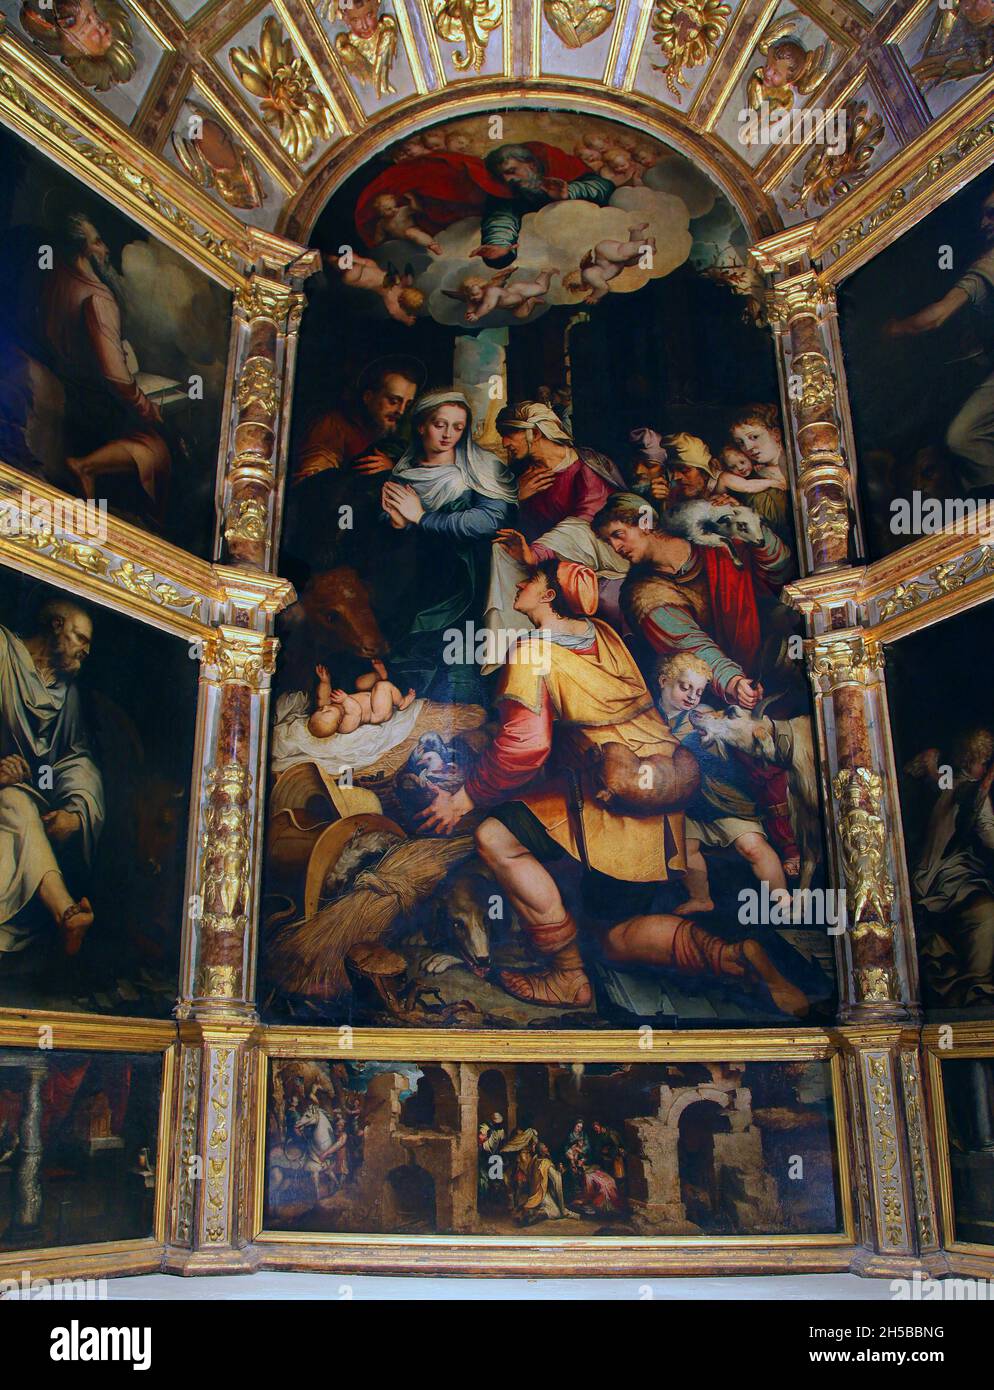 Part of the Altarpiece at the Cathedral of Seville by Luis de Vargas (1502–1568) Spanish painter of the late-Renaissance period .The Main thene is the Worship of the Shepherds,surrounded by the Announcement,the Presentacion and the Worship of the Three Wise Men.() Stock Photo